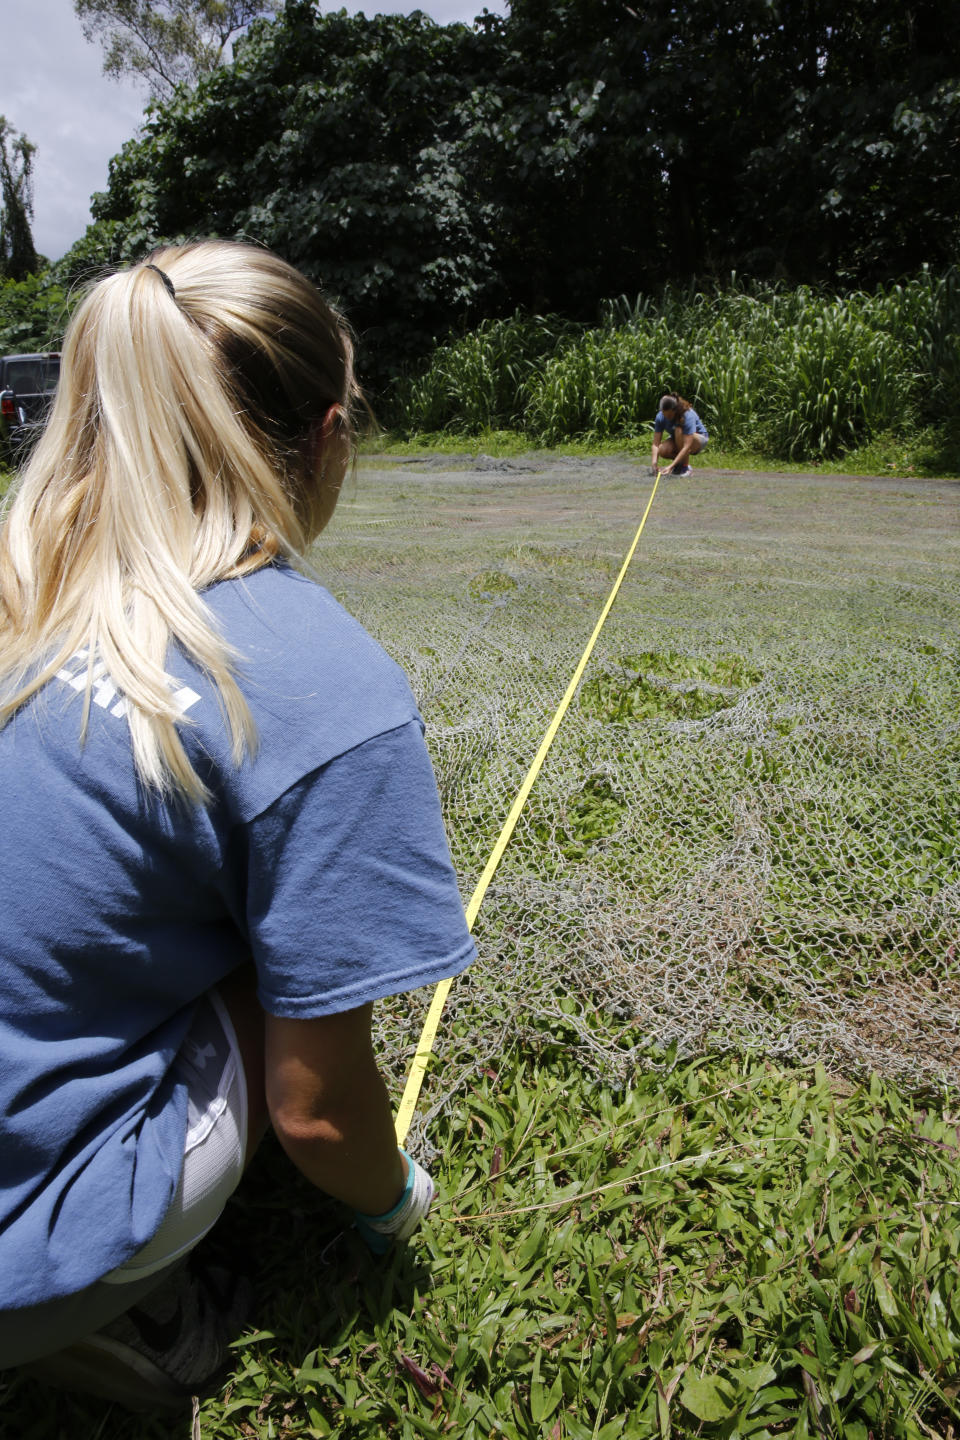 Jennifer Lynch, a research scientist at the National Institute of Standards and Technology and co-director of Hawaii Pacific University's Center for Marine Debris Research, right, and Raquel Corniuk, a research technician at the university, measure a large ghost net on Wednesday, May 12, 2021 in Kaneohe, Hawaii. Researchers are conducting a study that will attempt to trace derelict fishing gear that washes ashore in Hawaii back to the manufacturers and fisheries that it came from. (AP Photo/Caleb Jones)